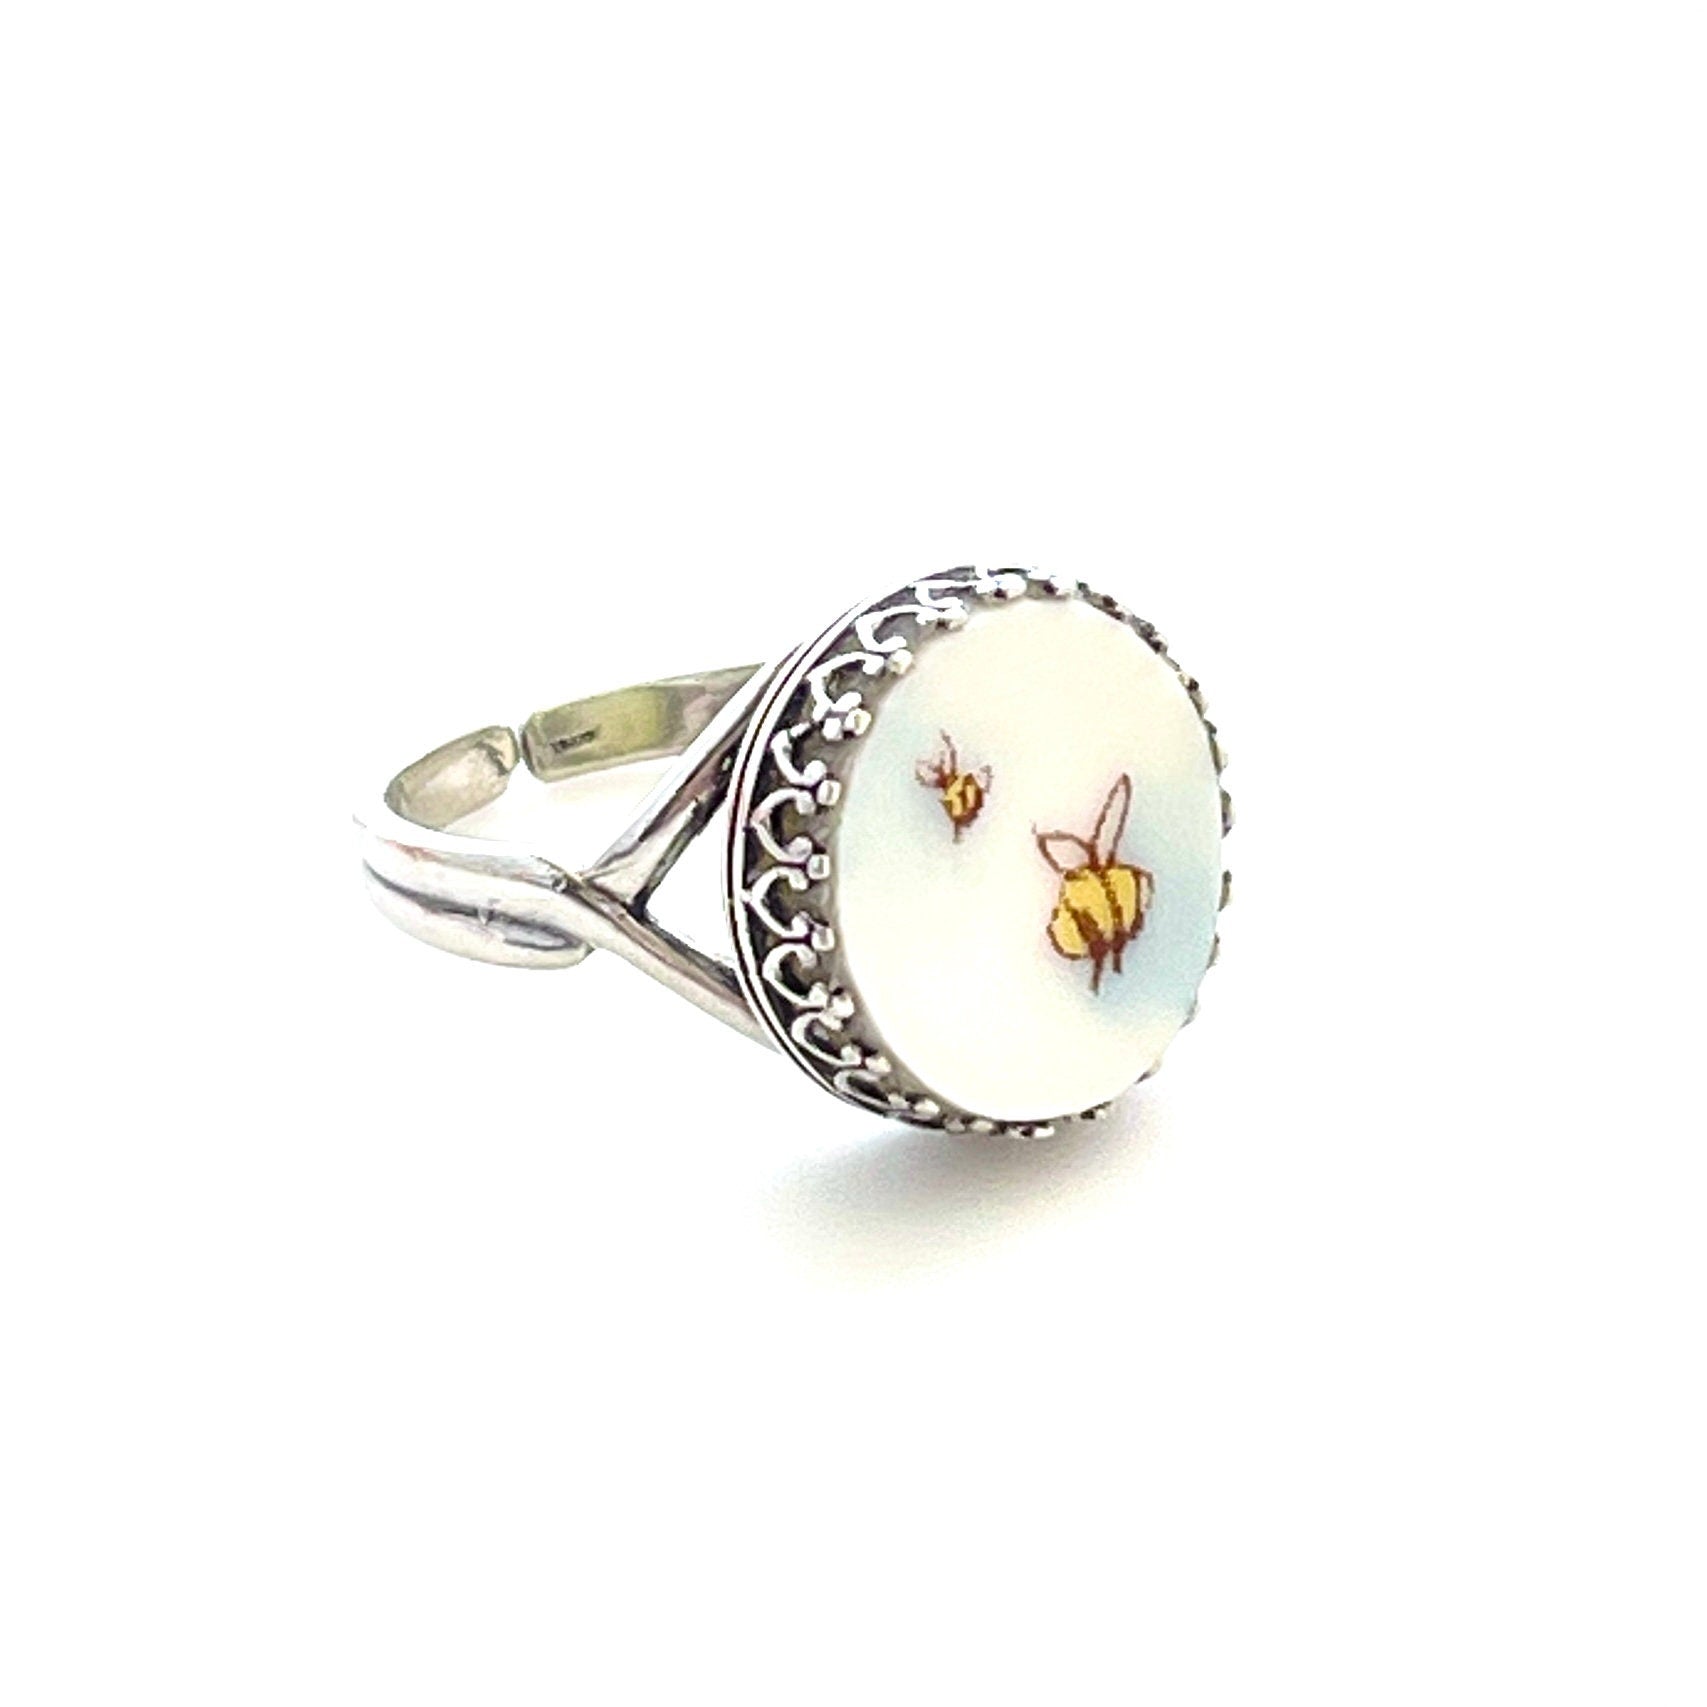 Honey Bee Ring, Insect Jewelry, Dainty Sterling Silver Ring, Bumble Bee China, Nature Lover Jewelry Gifts, Unique Gifts for Women